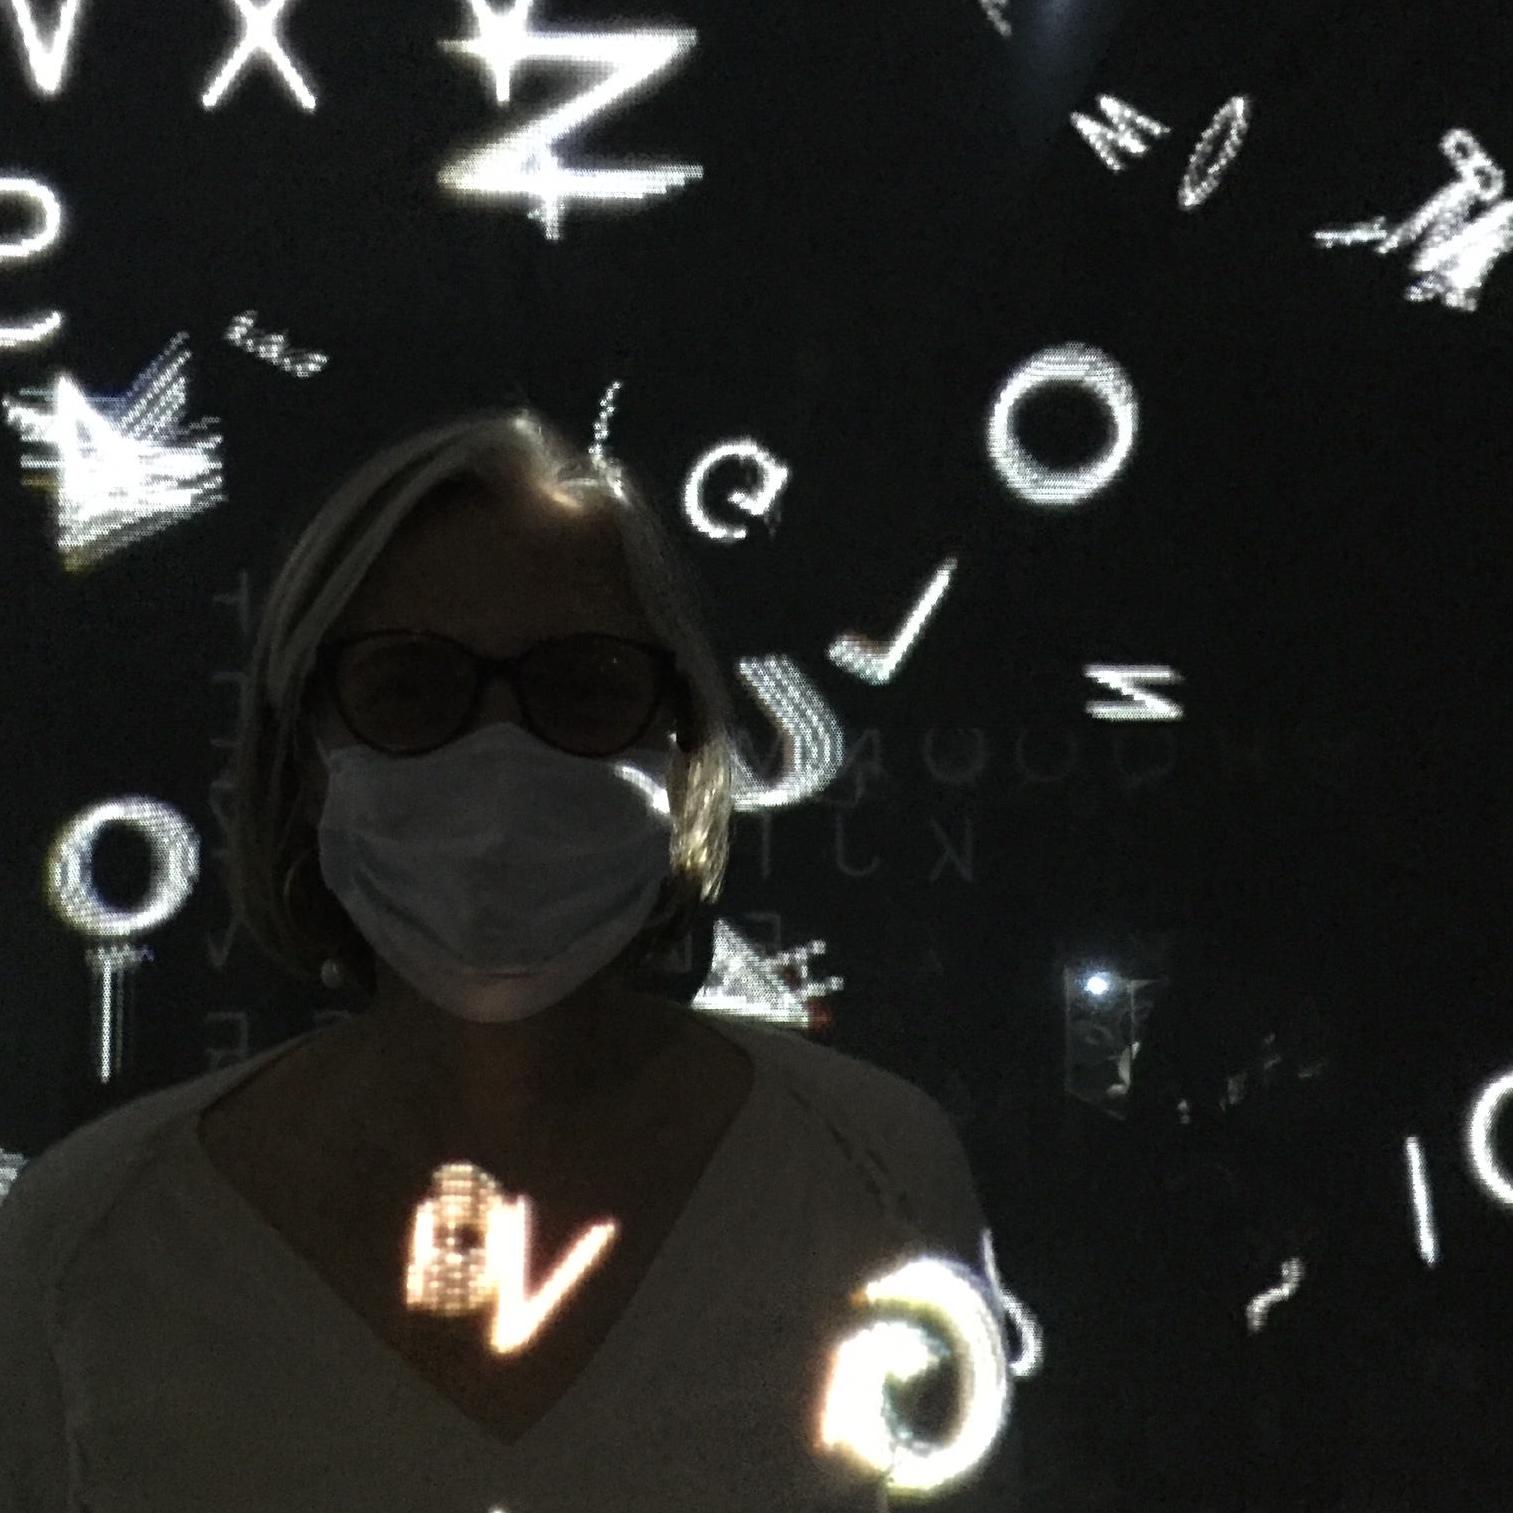 A lady wearing a mask, in the dark, with white letters projected onto her